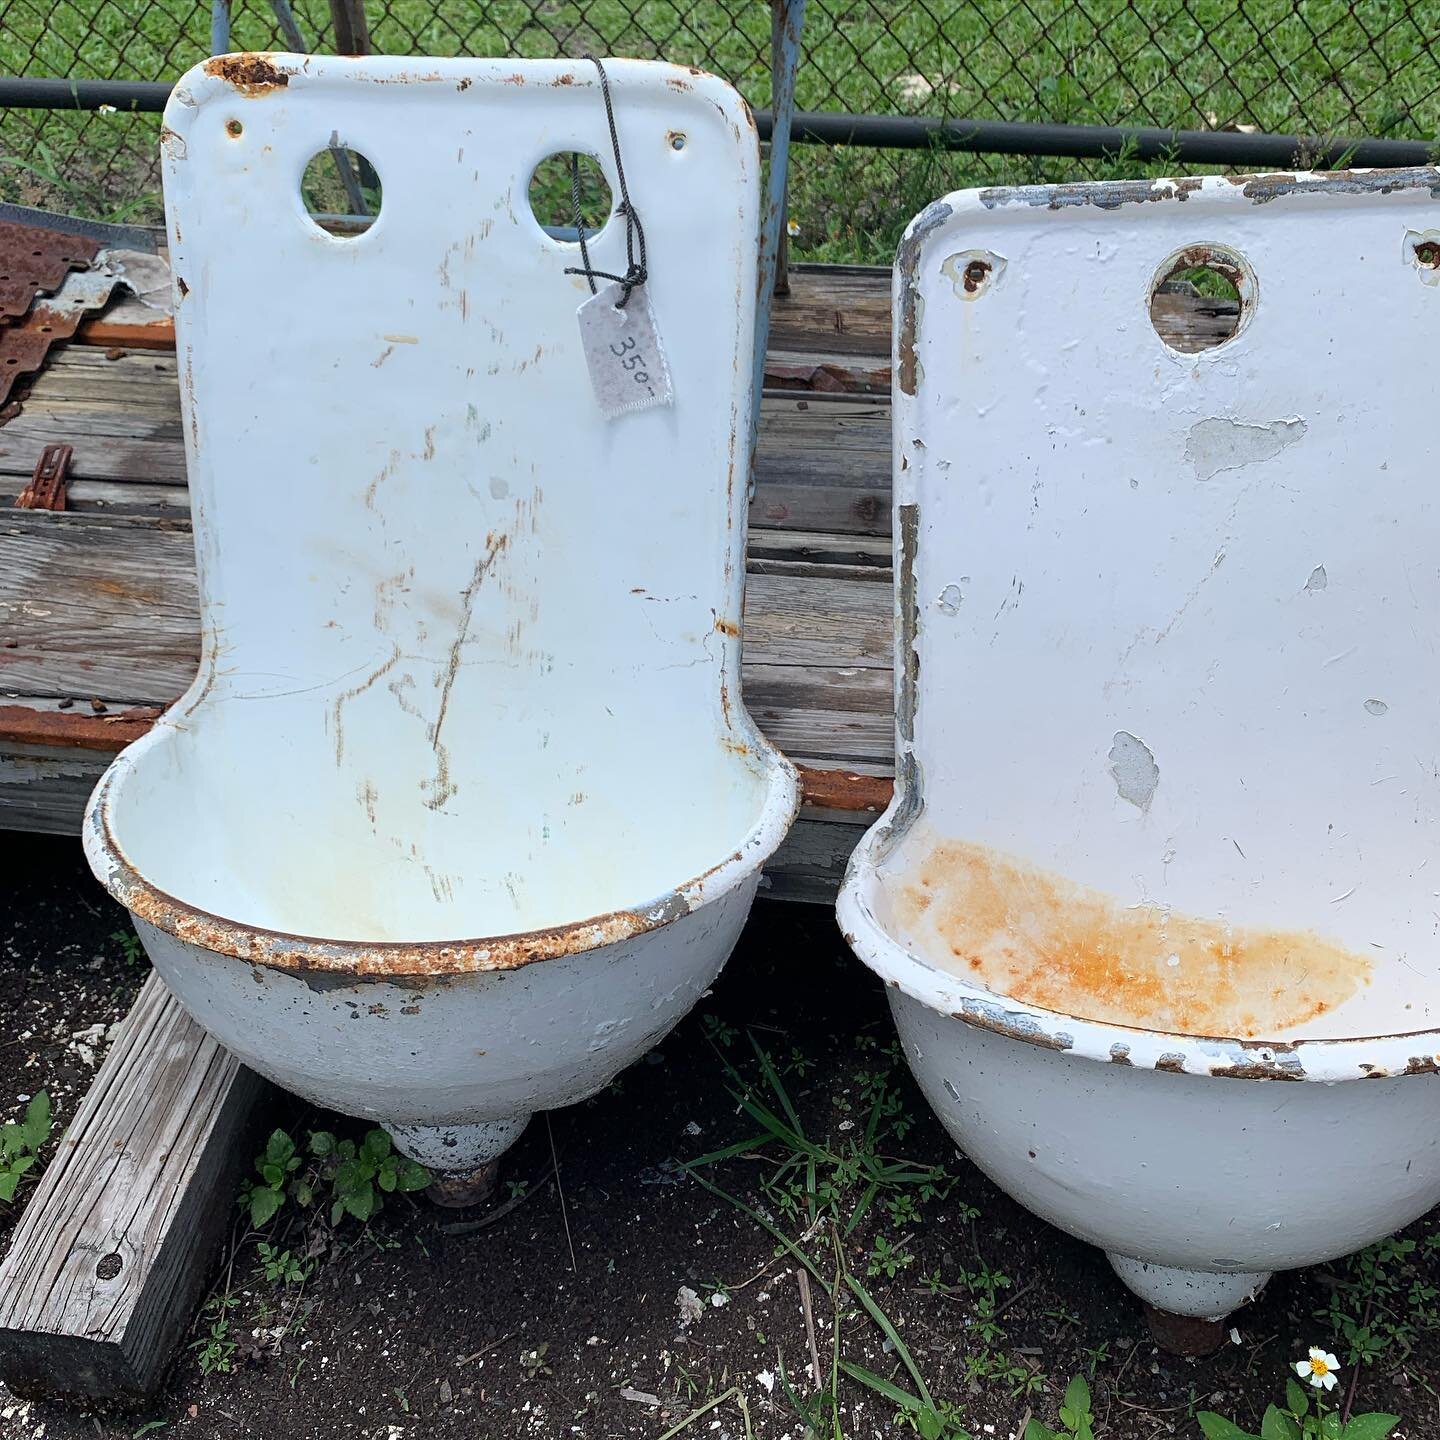 These sweet little porcelain wall mount sinks are too cute and look great in a garden potting area #vintage #garden #design #antiques #shoptampa